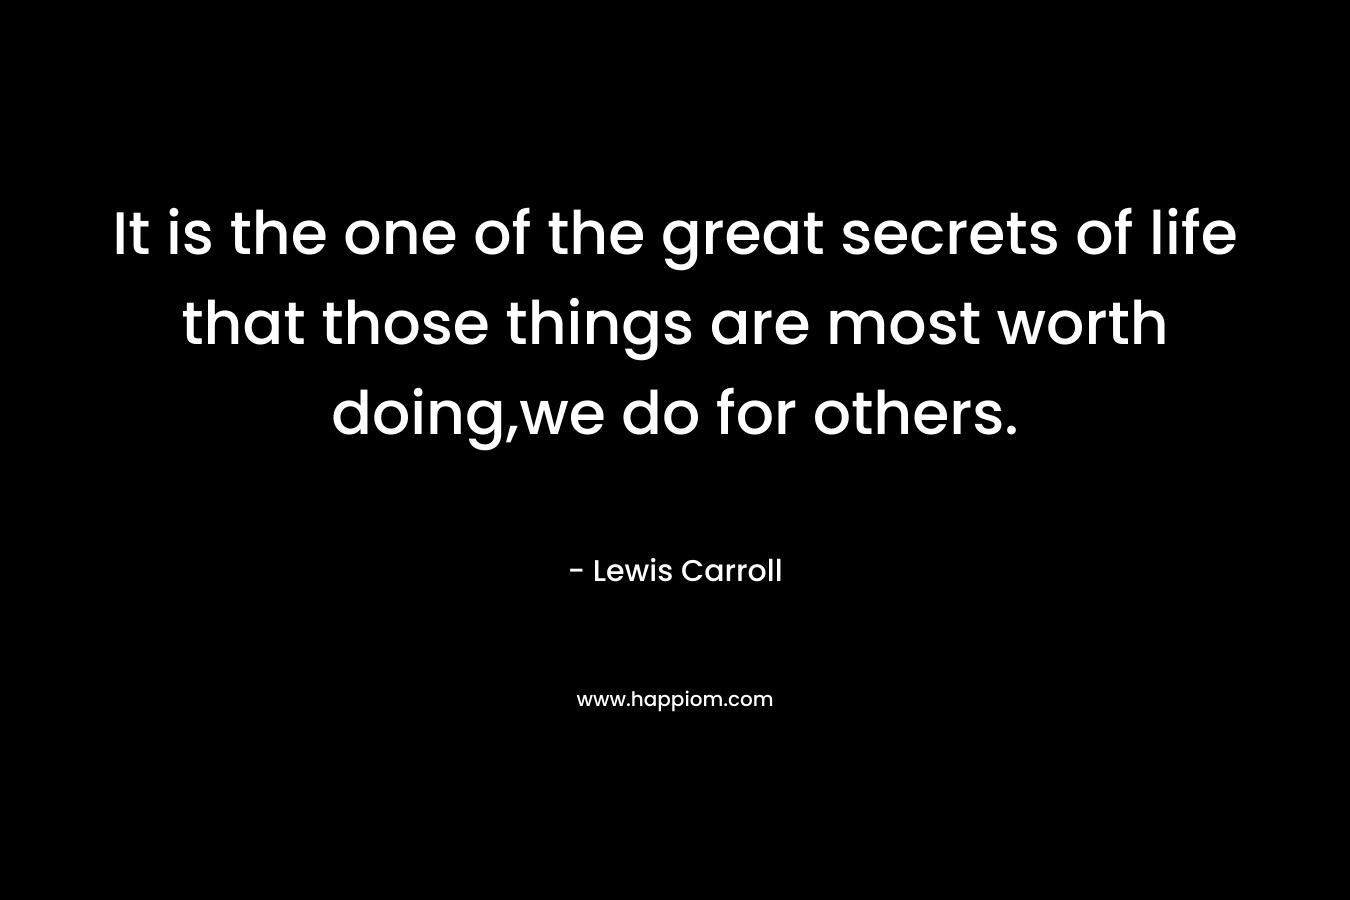 It is the one of the great secrets of life that those things are most worth doing,we do for others.